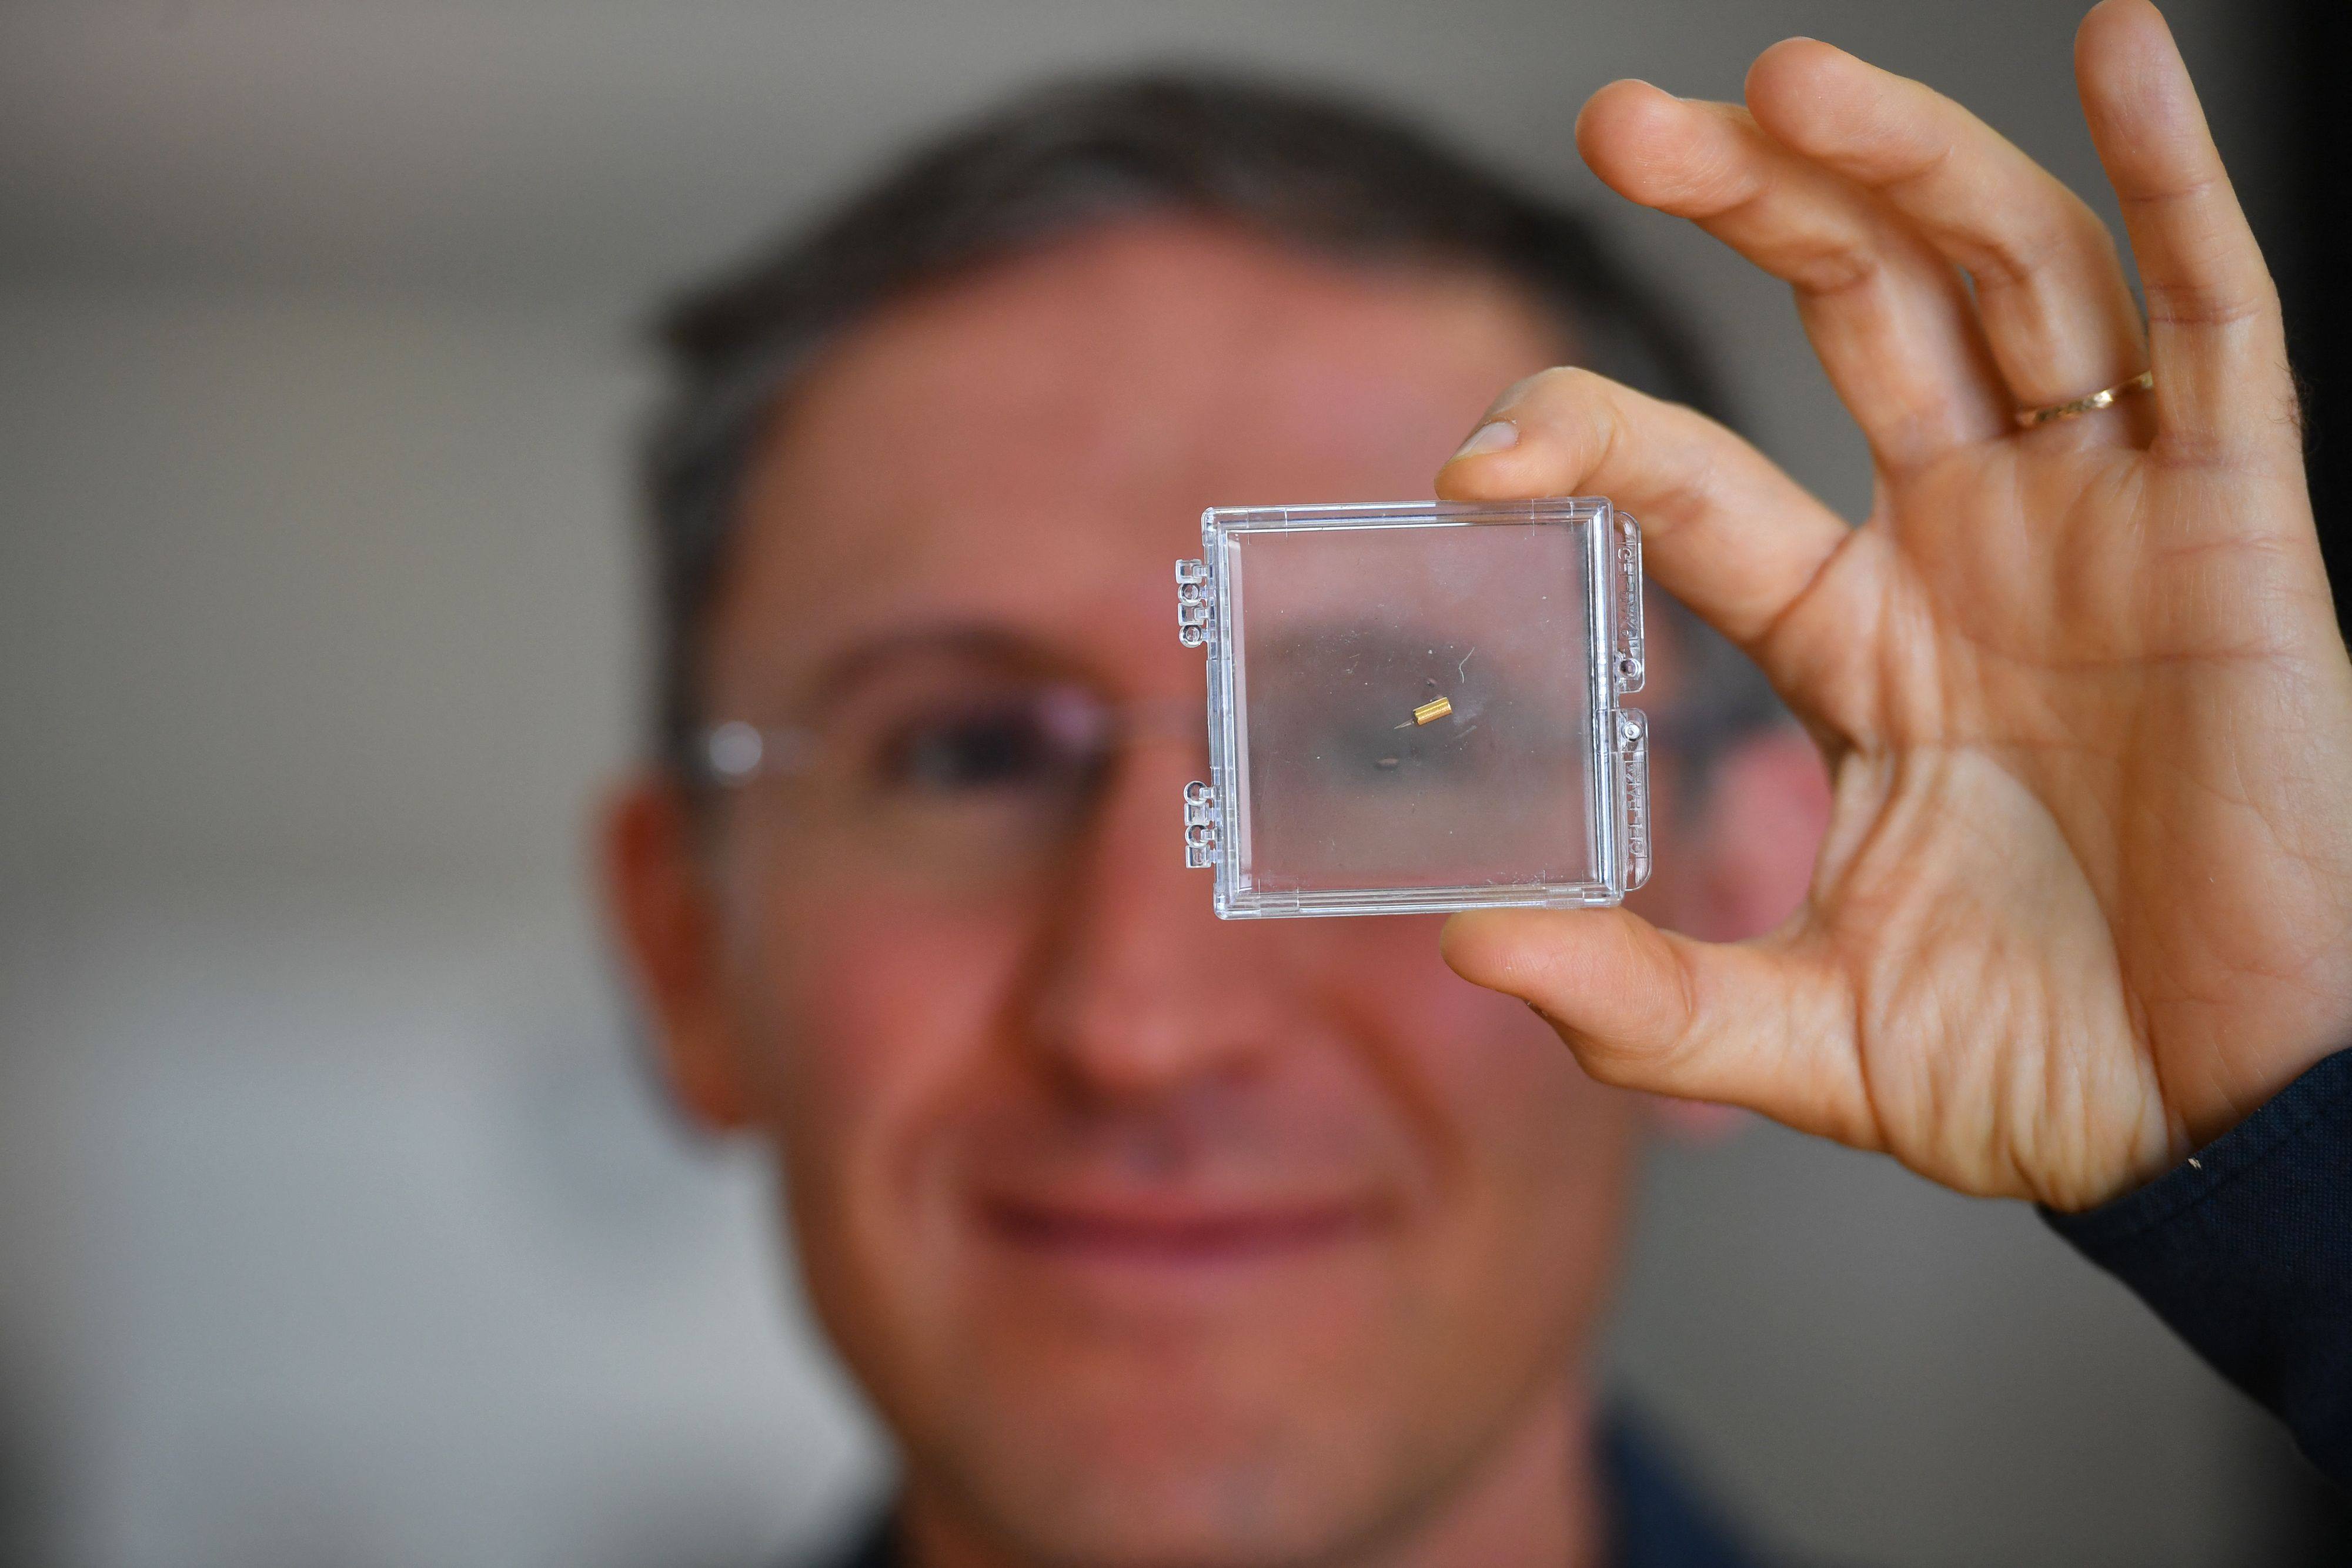 Bionaut Labs CEO and founder Michael Shpigelmacher displays the tiny remote-controlled medical micro-robot his company is developing in Los Angeles in March. Photo: AFP